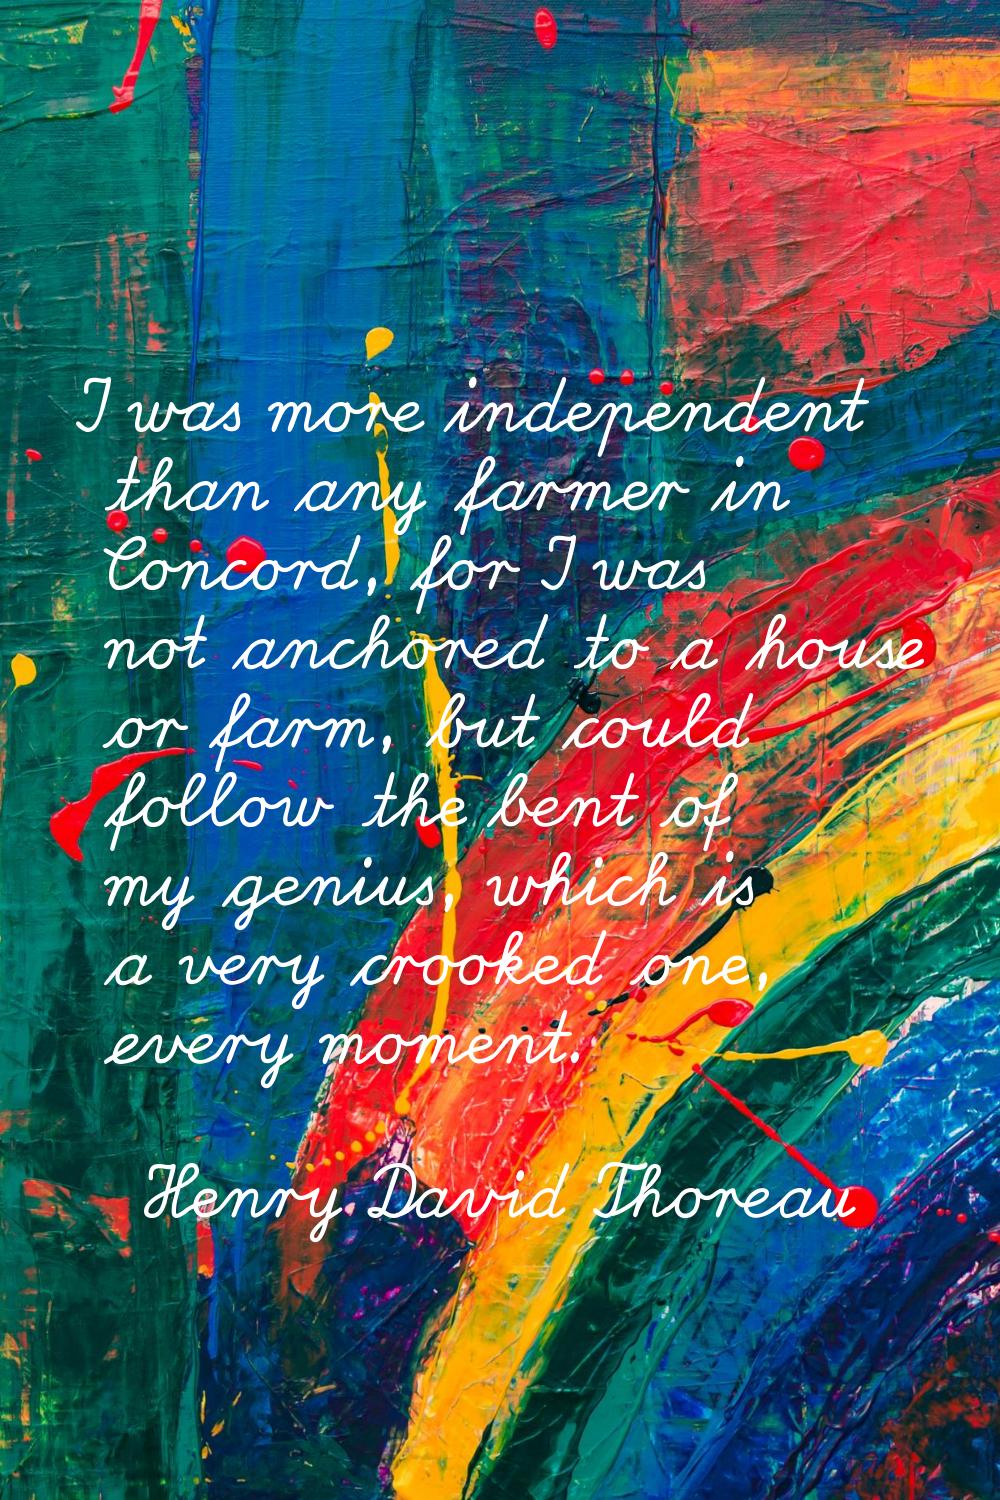 I was more independent than any farmer in Concord, for I was not anchored to a house or farm, but c